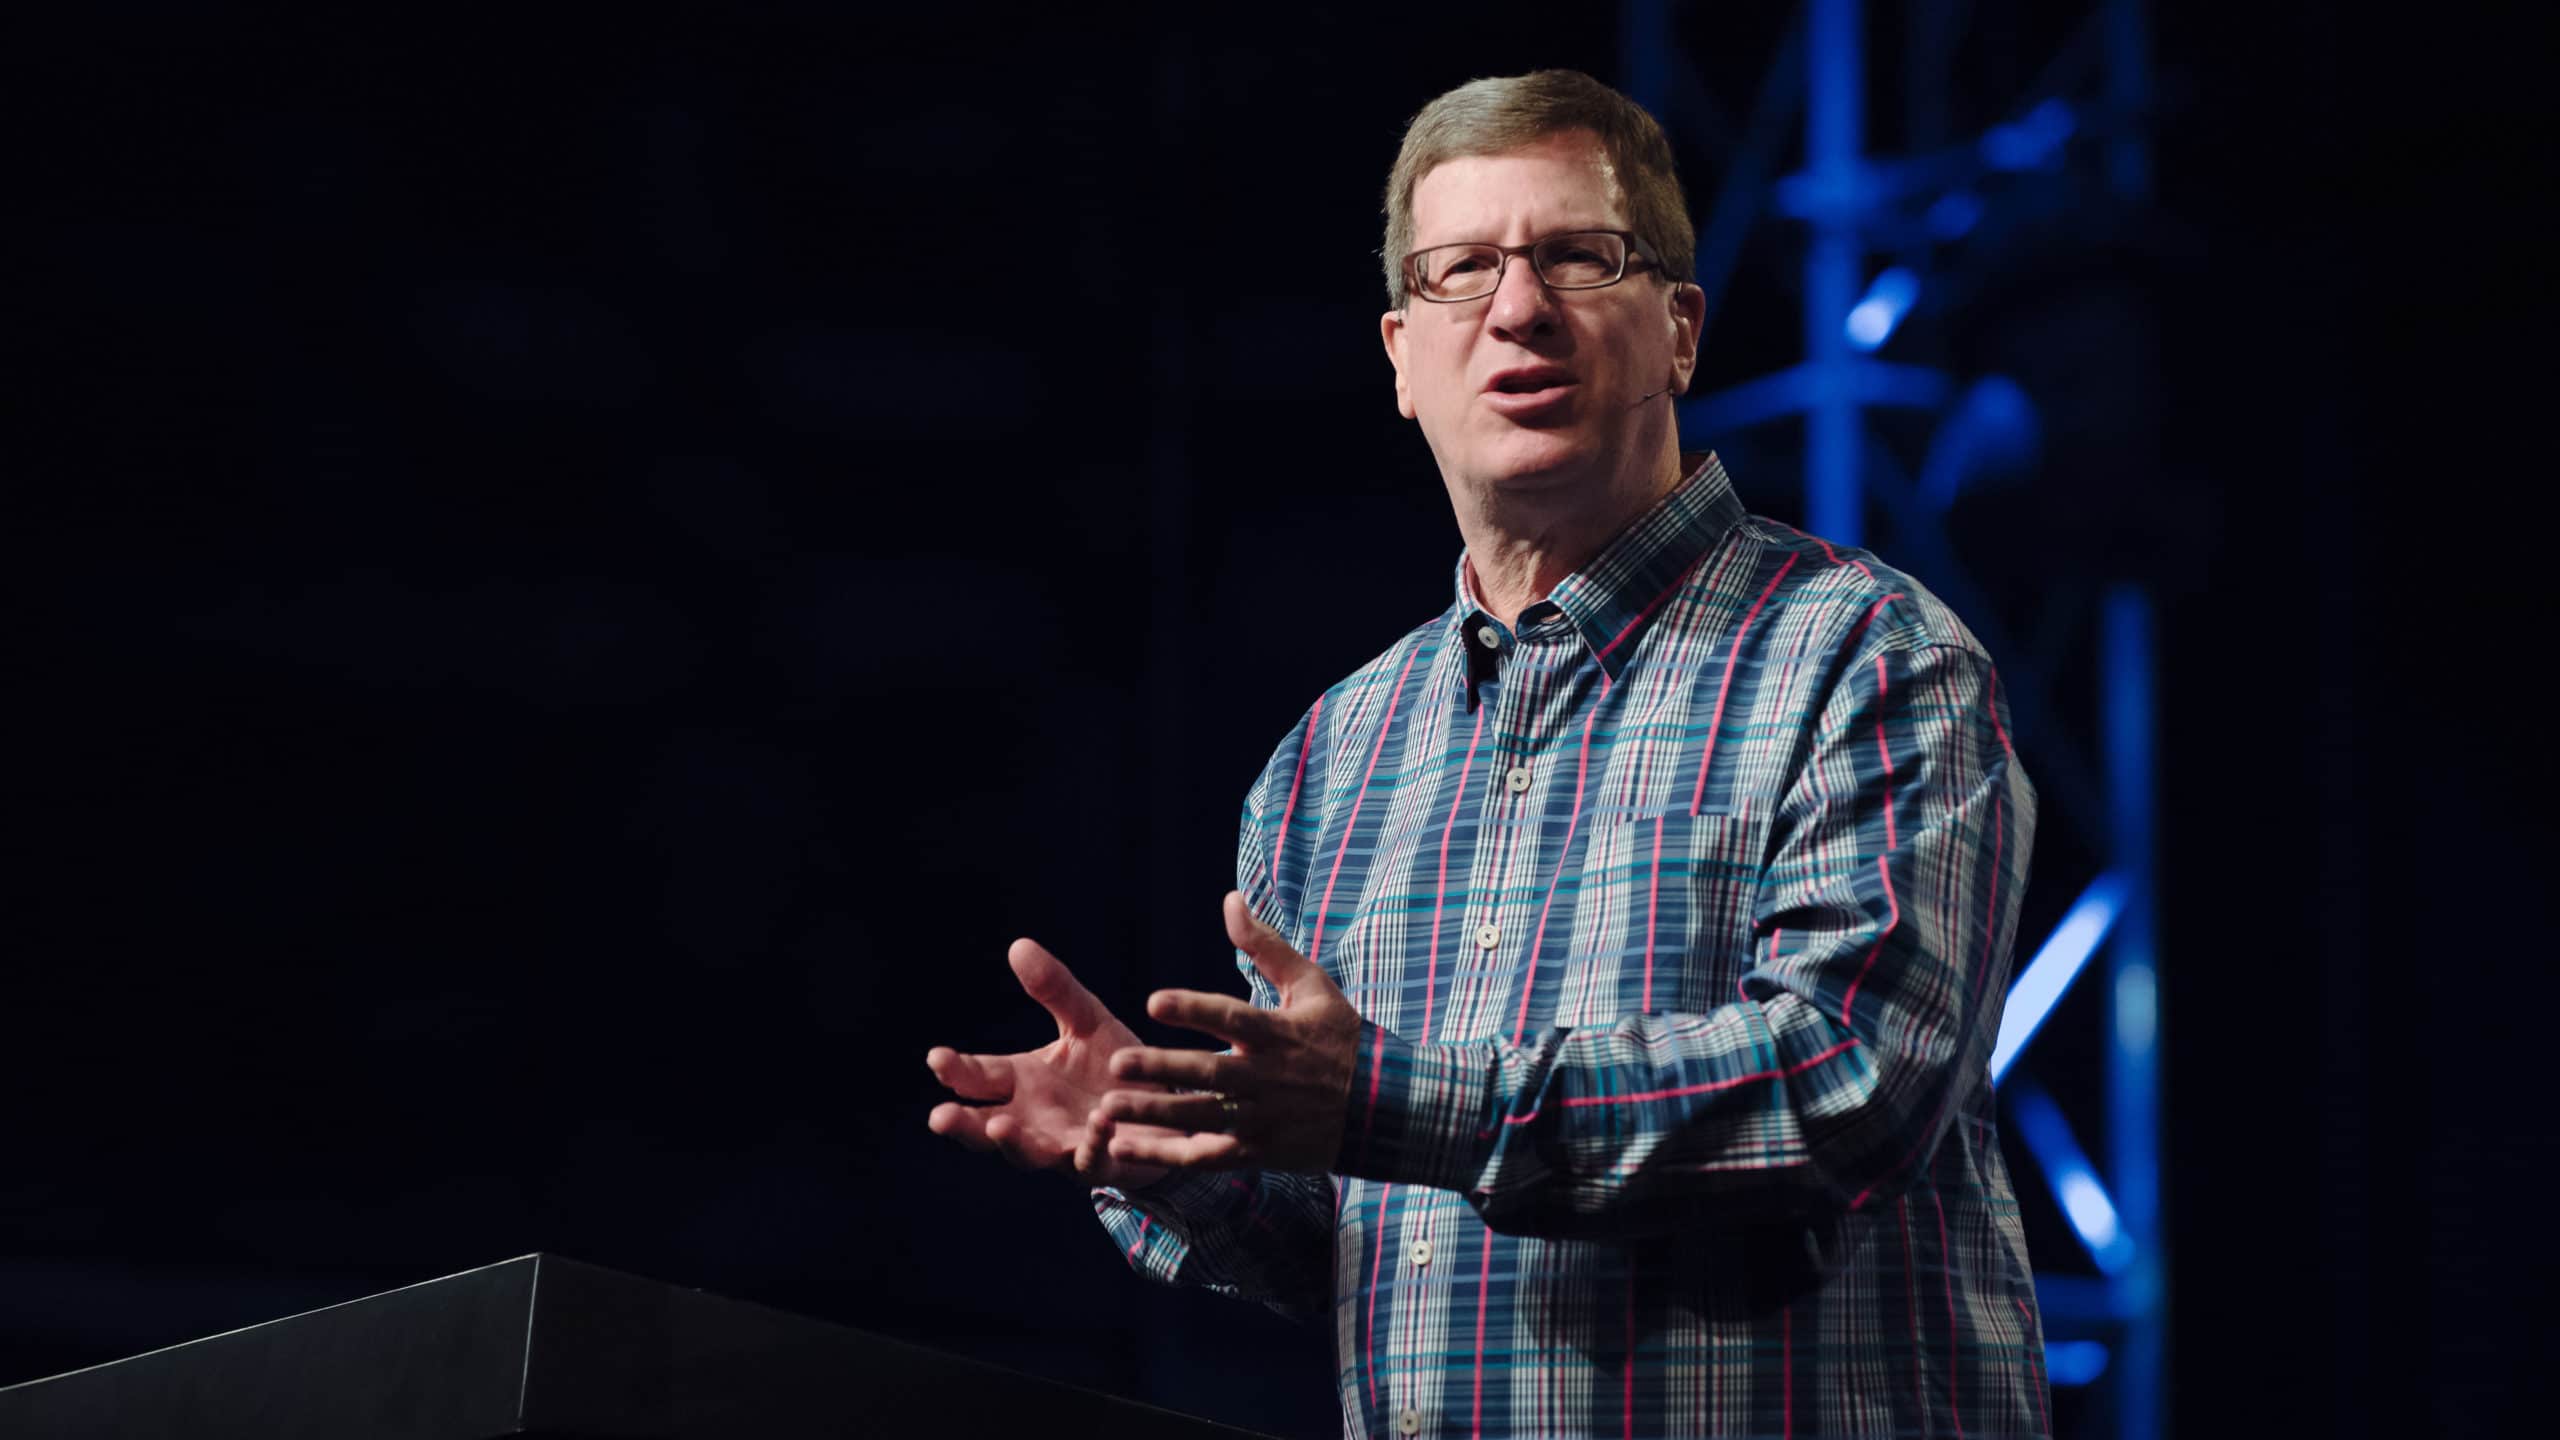 author Lee Strobel shares a message from Matthew 5 on the power of evangelism in our “Sunday Morning" series at Harvest Christian Fellowship.